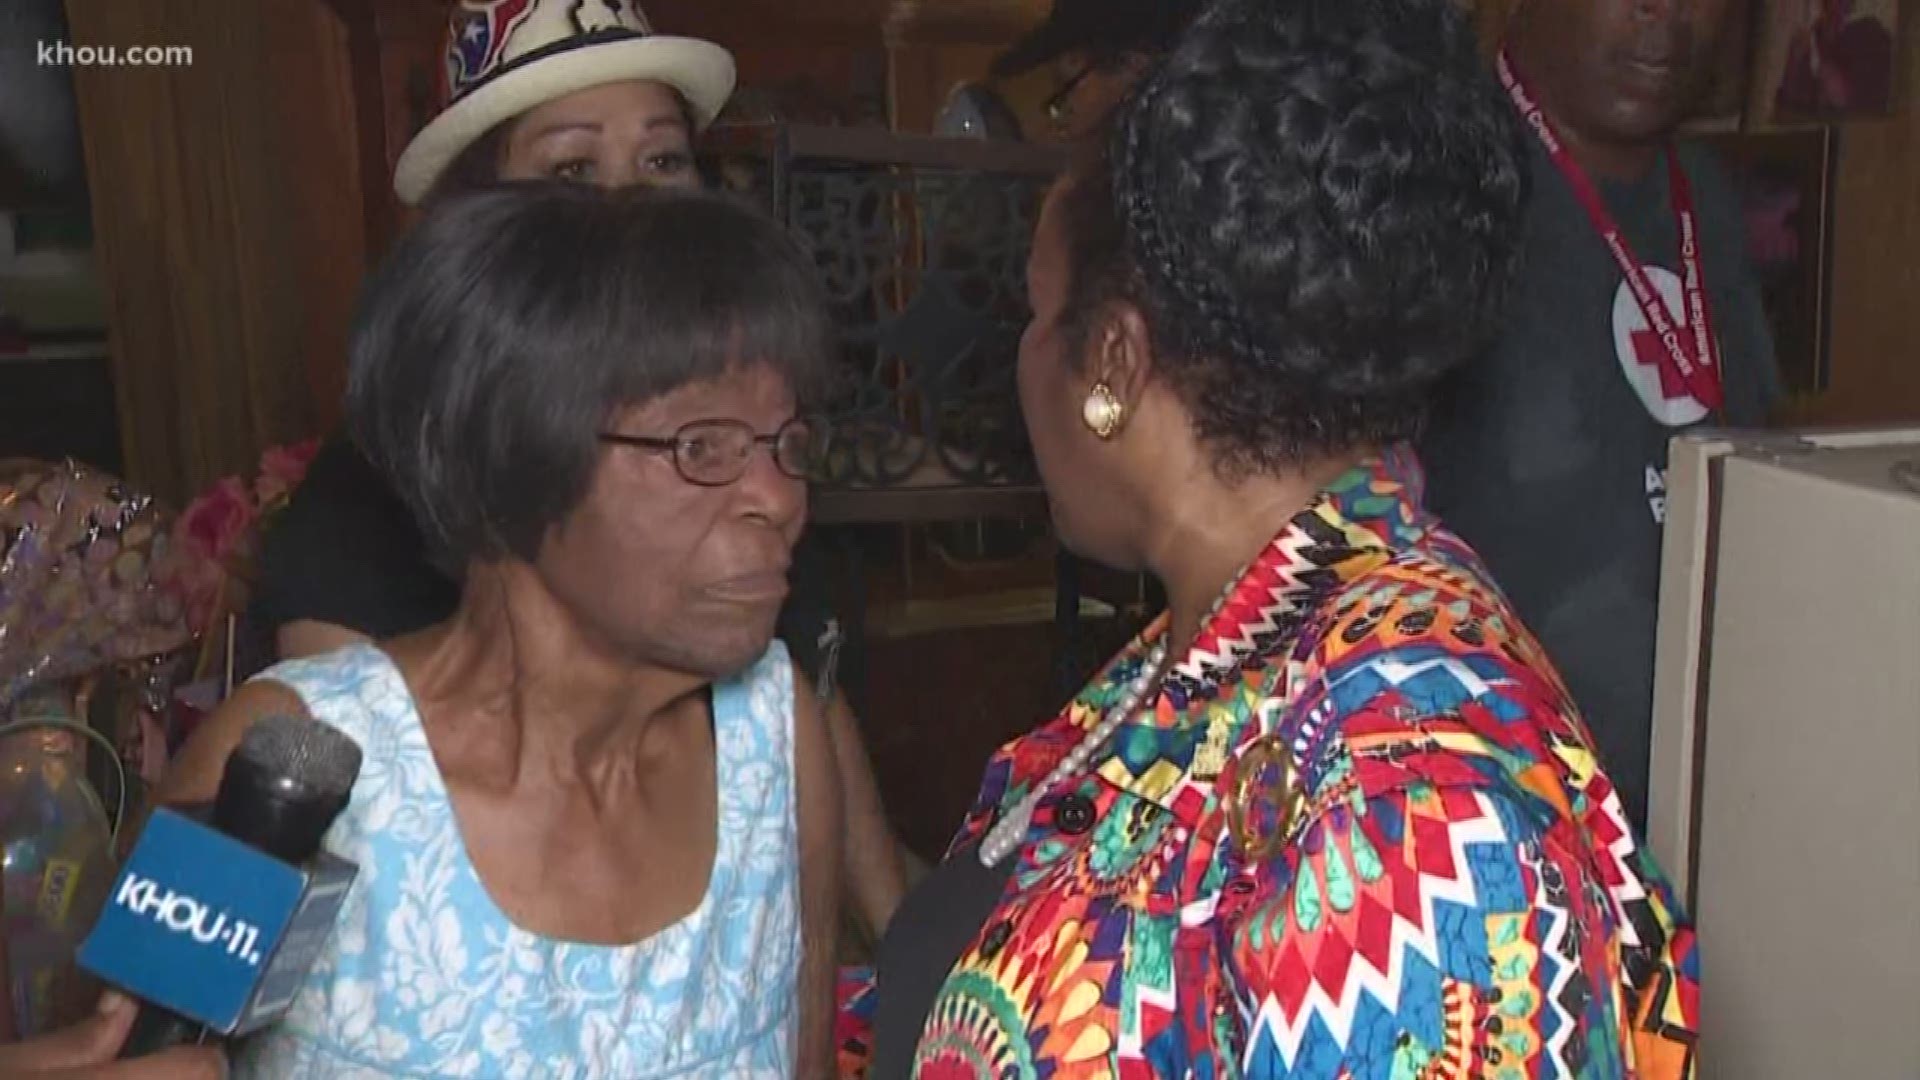 As part of Congresswoman Sheila Jackson Lee's Beat The Heat Program, volunteers installed an air conditioning unit inside the home of an elderly woman.